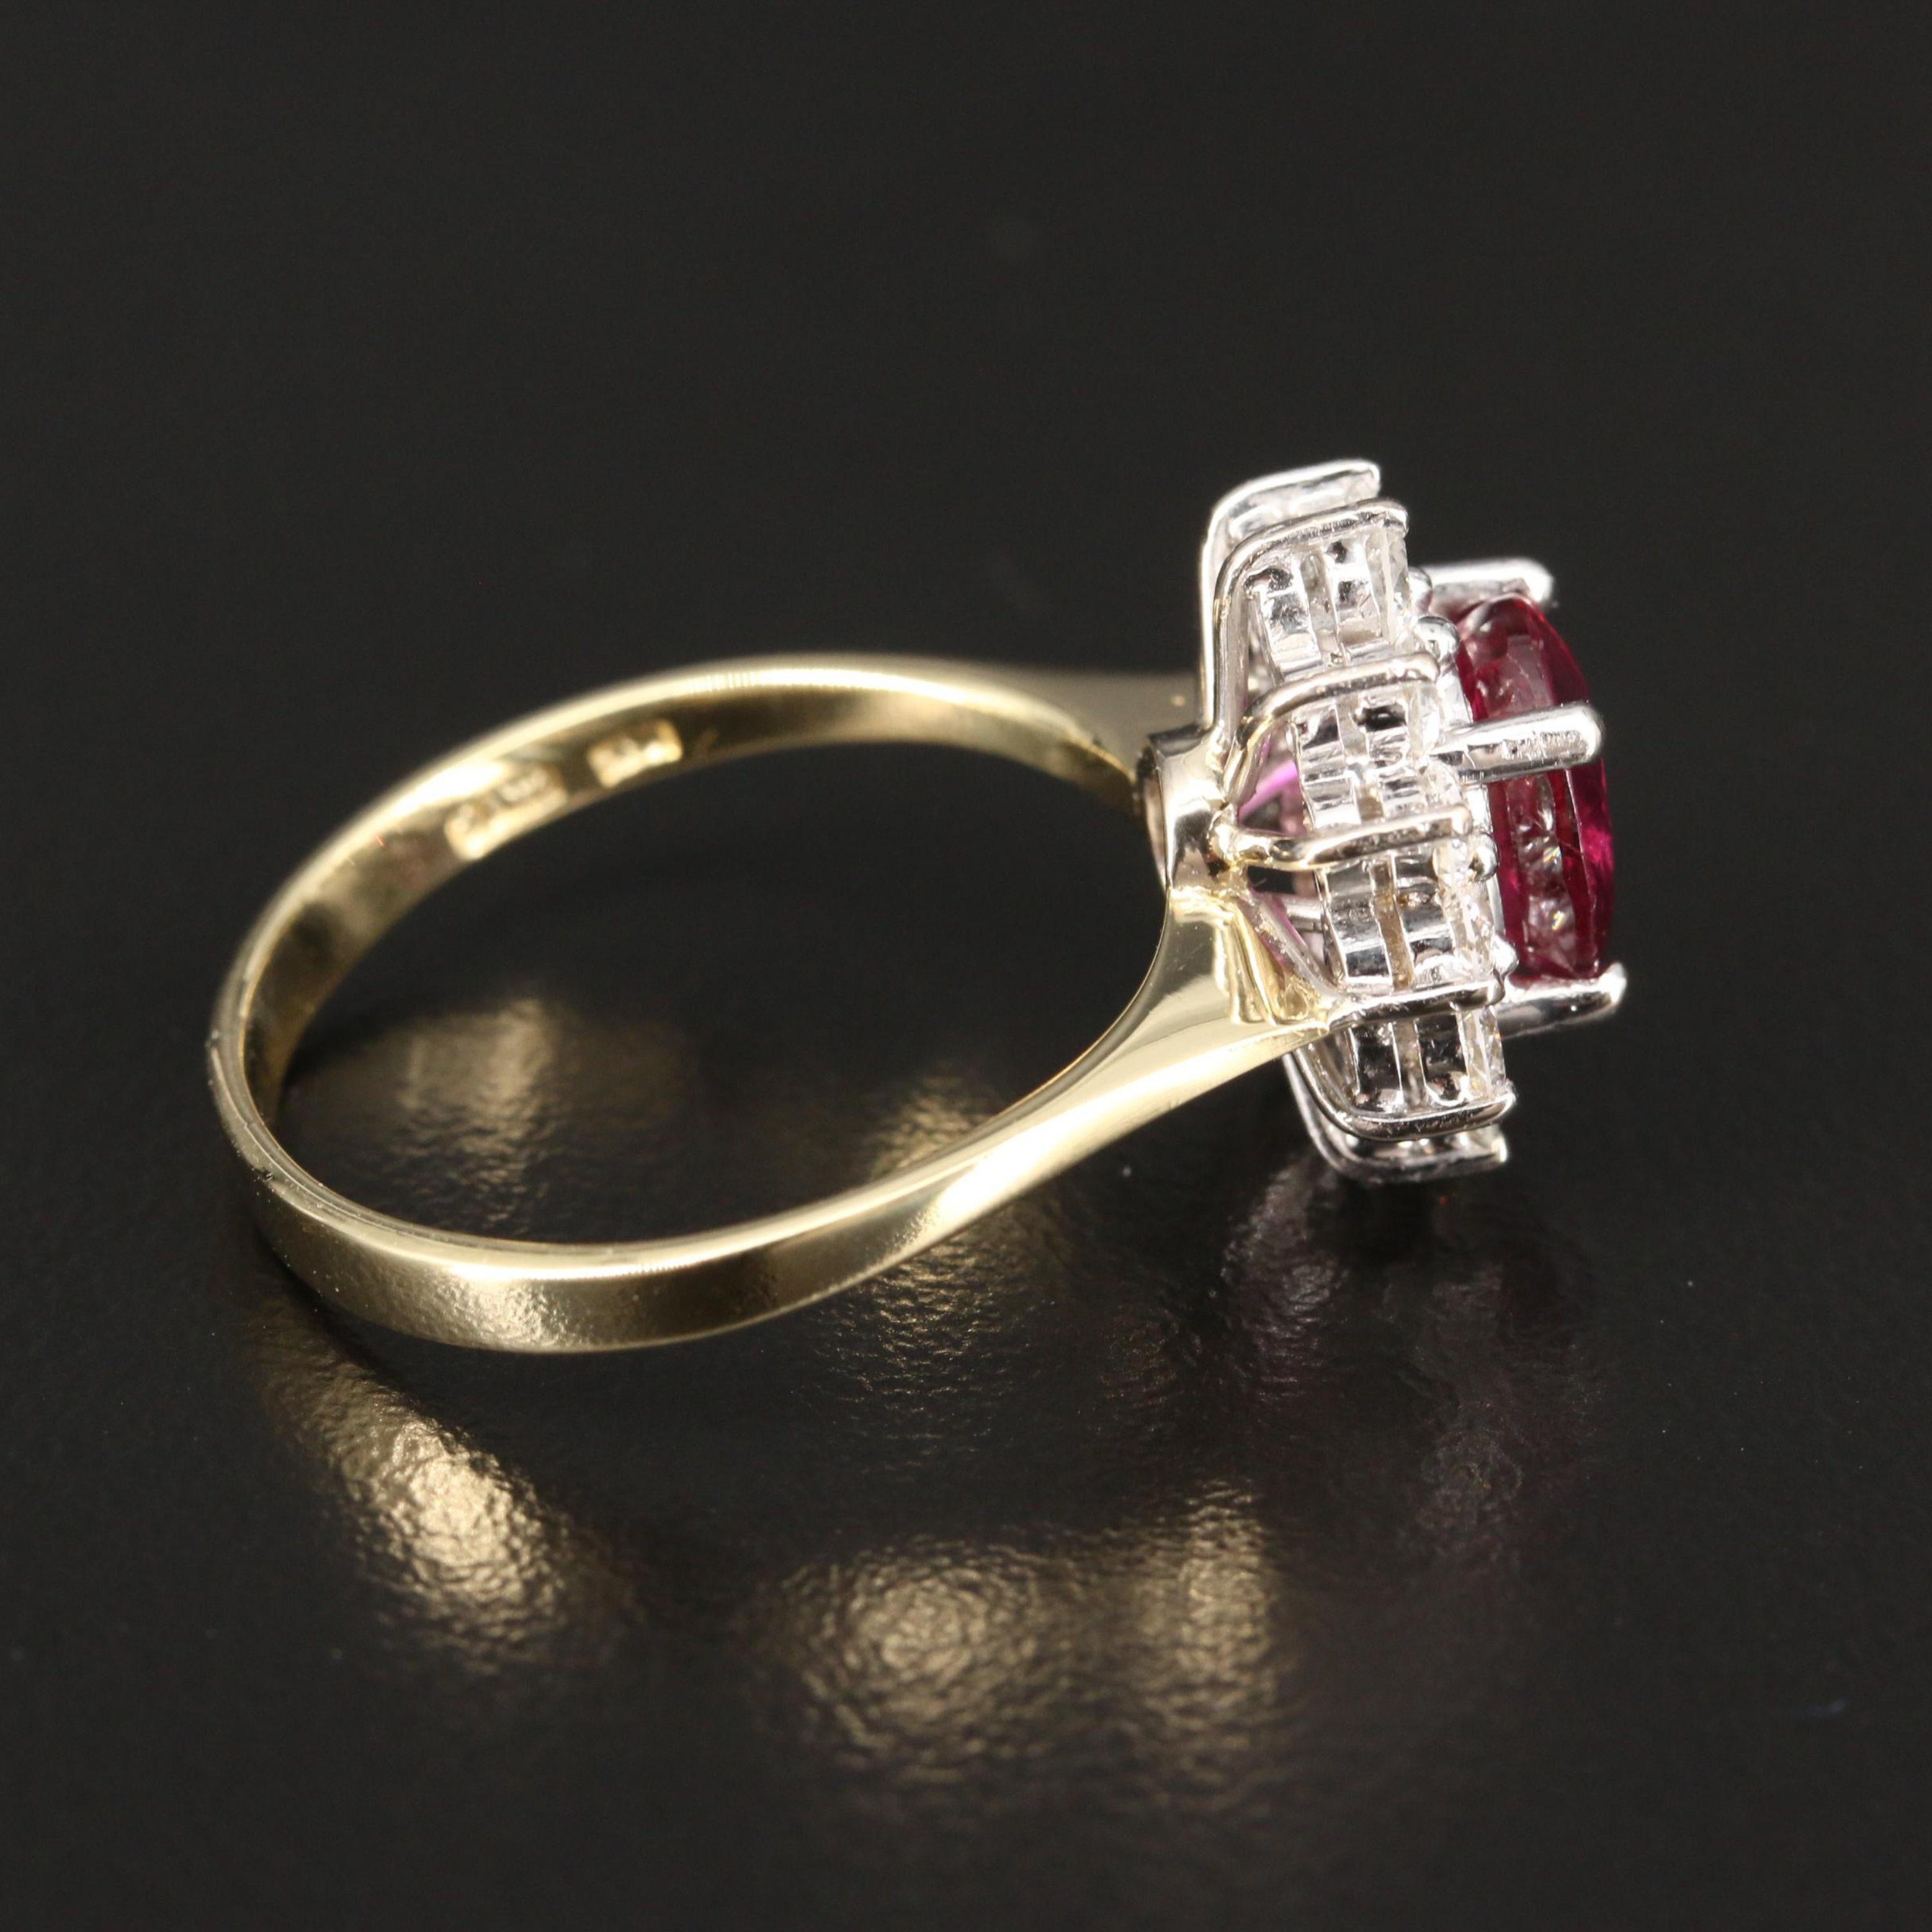 For Sale:  Certified 1.19 Carat Ruby Diamond Engagement Ring Floral Halo Ruby Bridal Ring 5